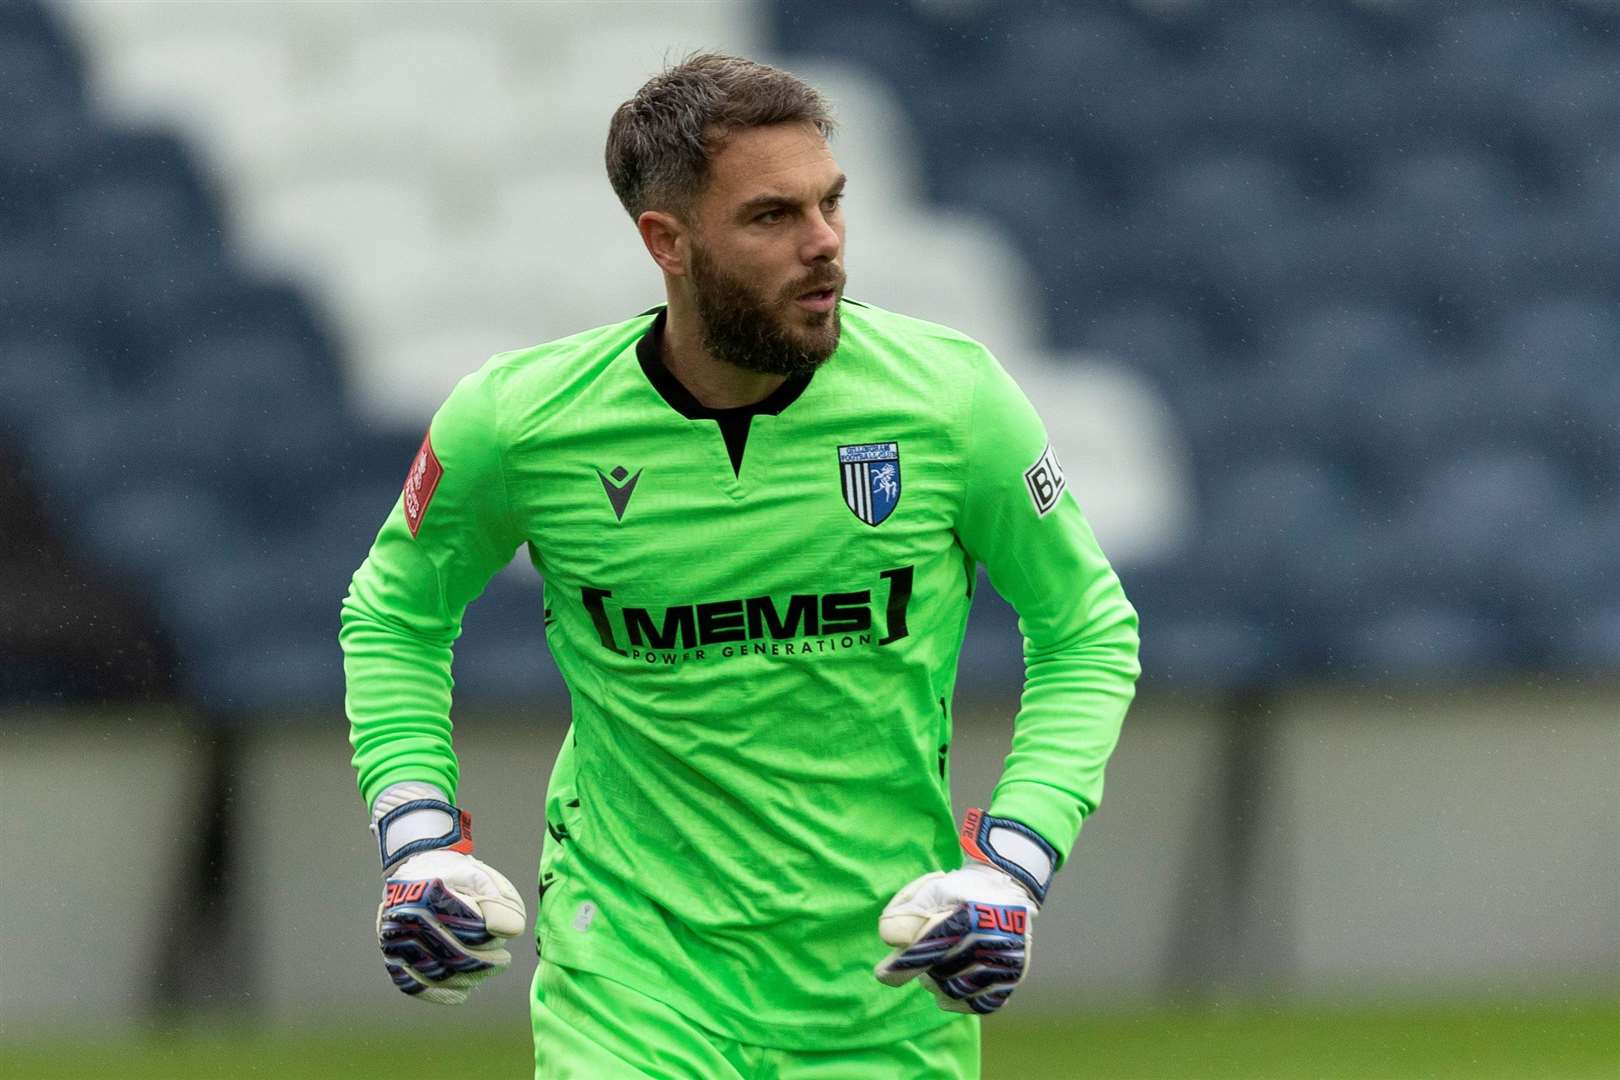 Glenn Morris kept his place in goal for Gillingham at Salford and kept another clean sheet